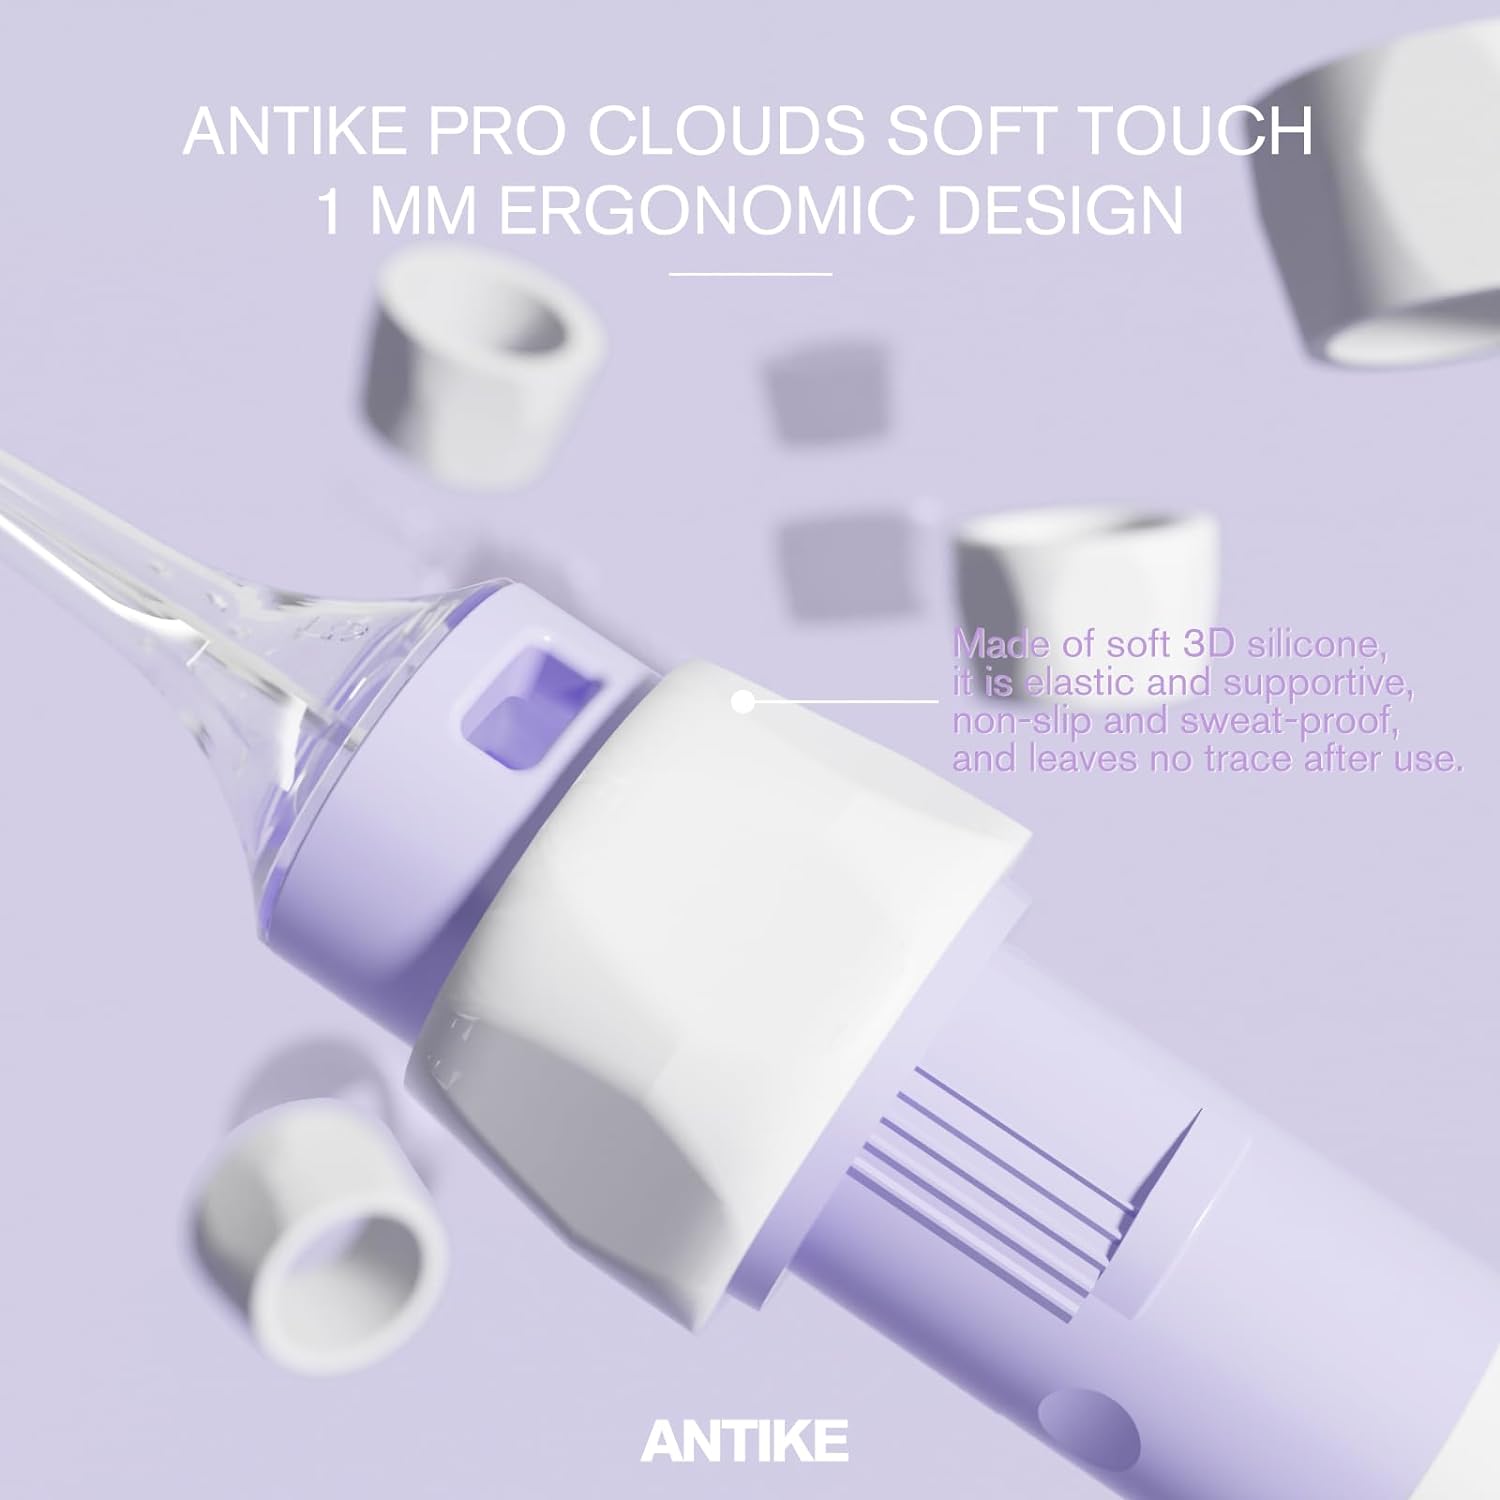 ANTIKE Clouds Pro Tattoo Needles, made of 3D silicone